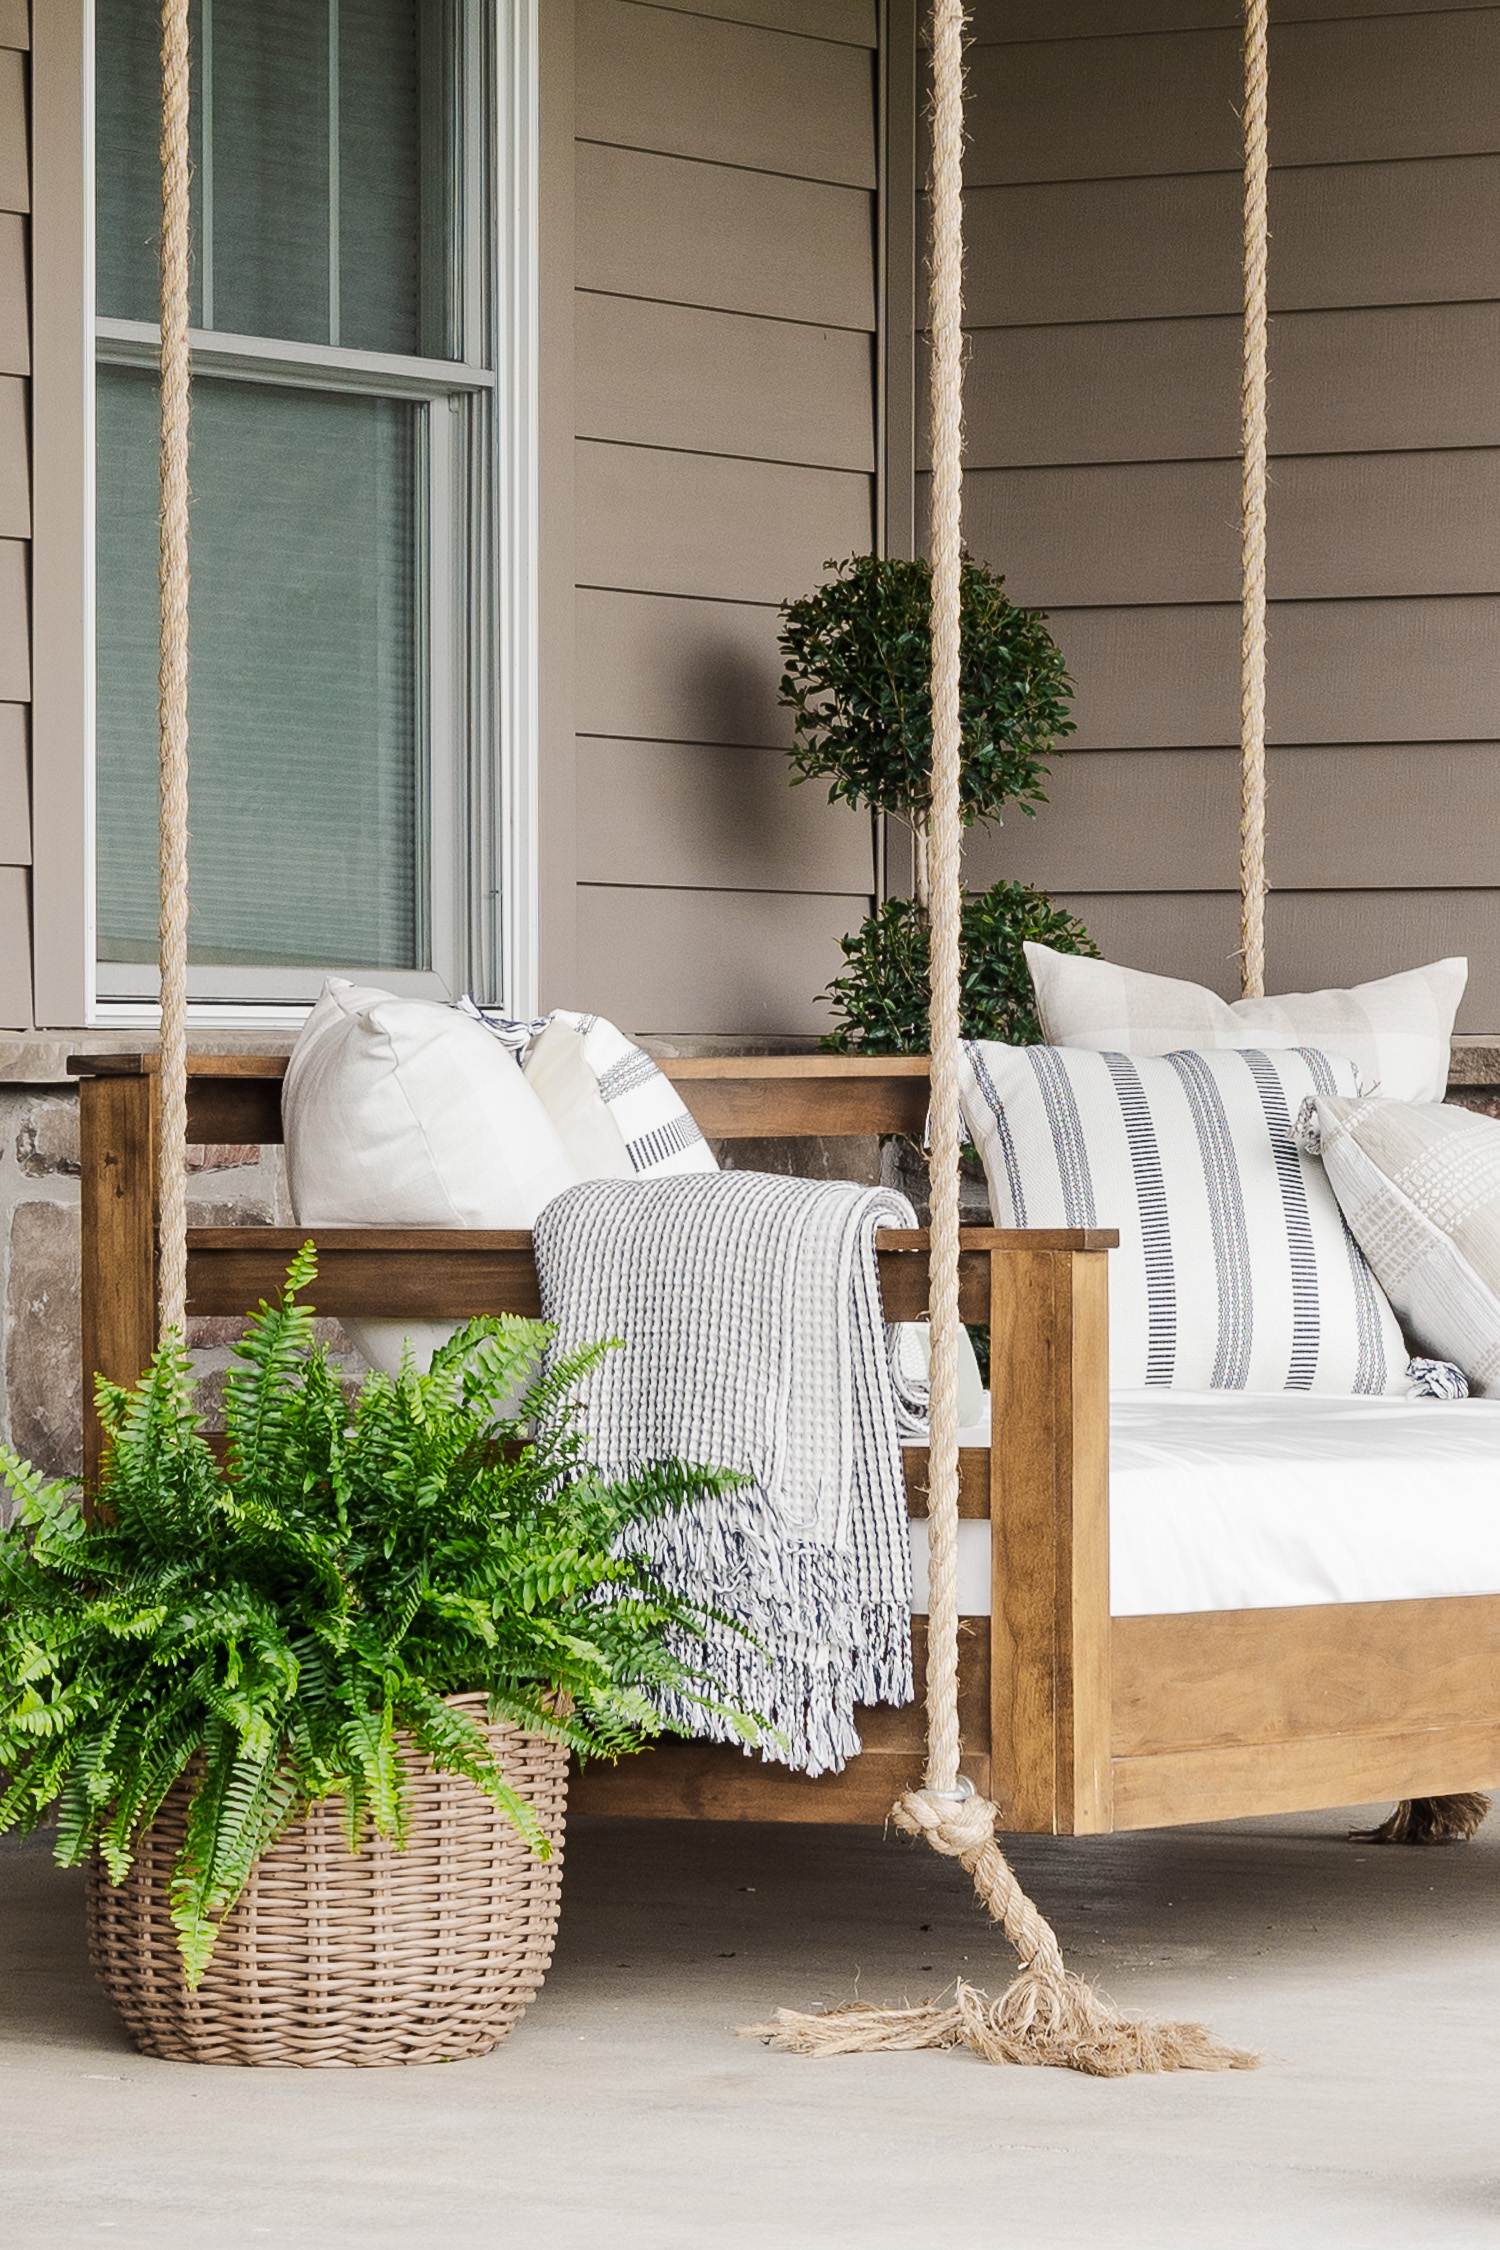 wood patio swing with green plants and pillows and blanket